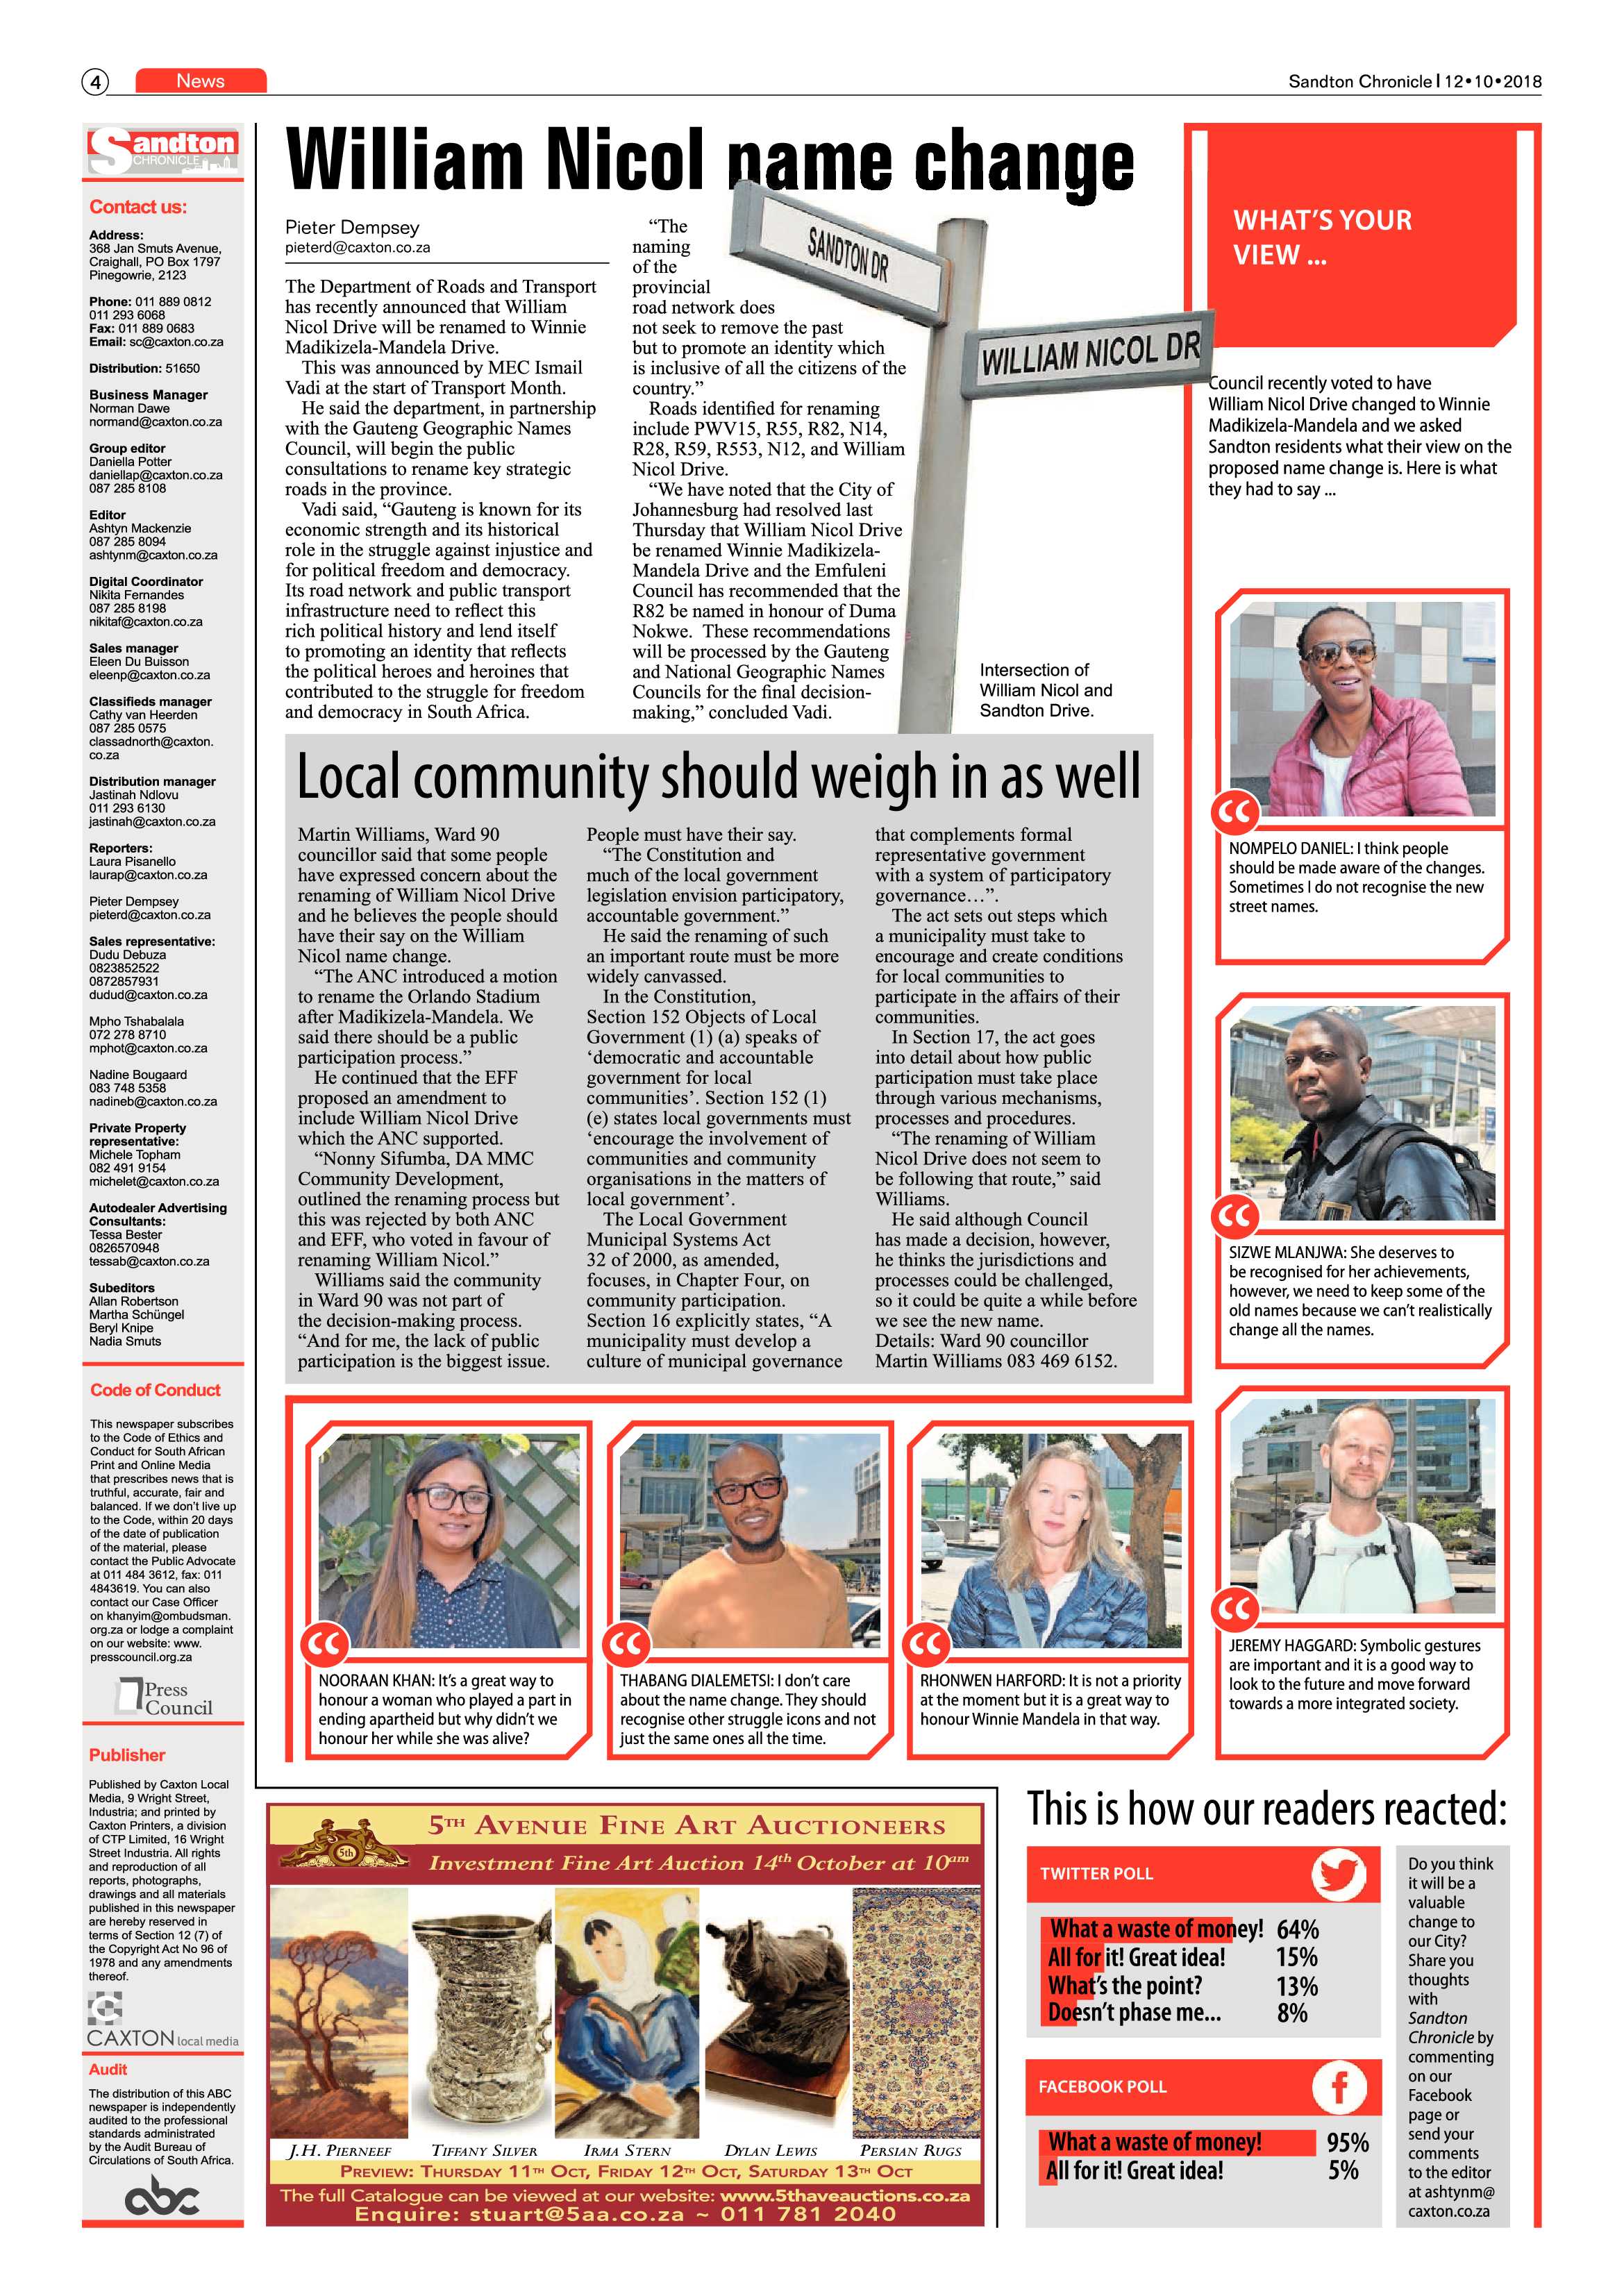 Sandton Chronicle 12 October 2018 page 4